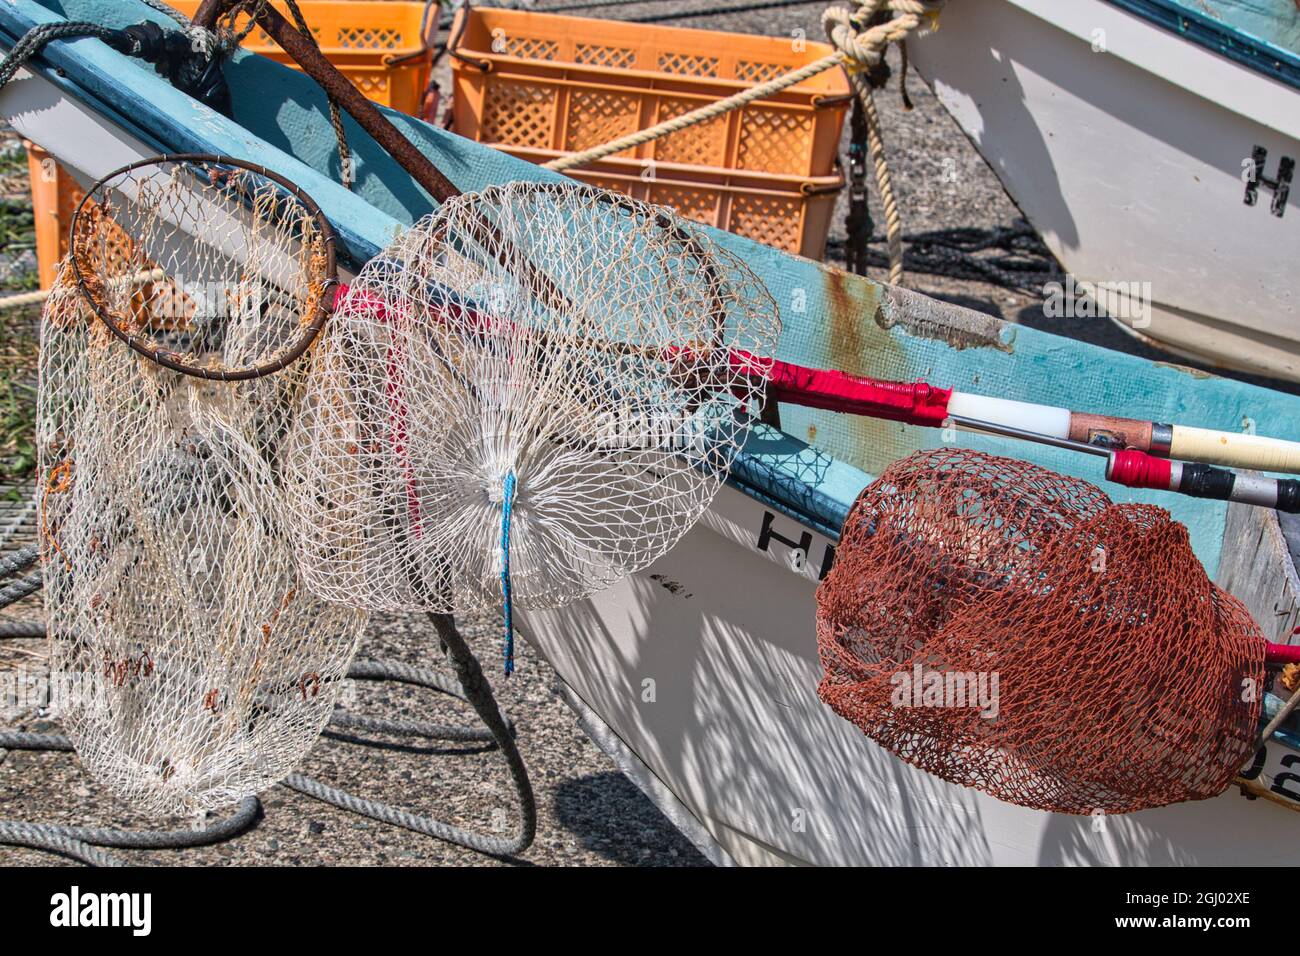 https://c8.alamy.com/comp/2GJ02XE/three-commercial-landing-nets-used-for-fishing-rest-on-a-blue-and-white-boat-2GJ02XE.jpg